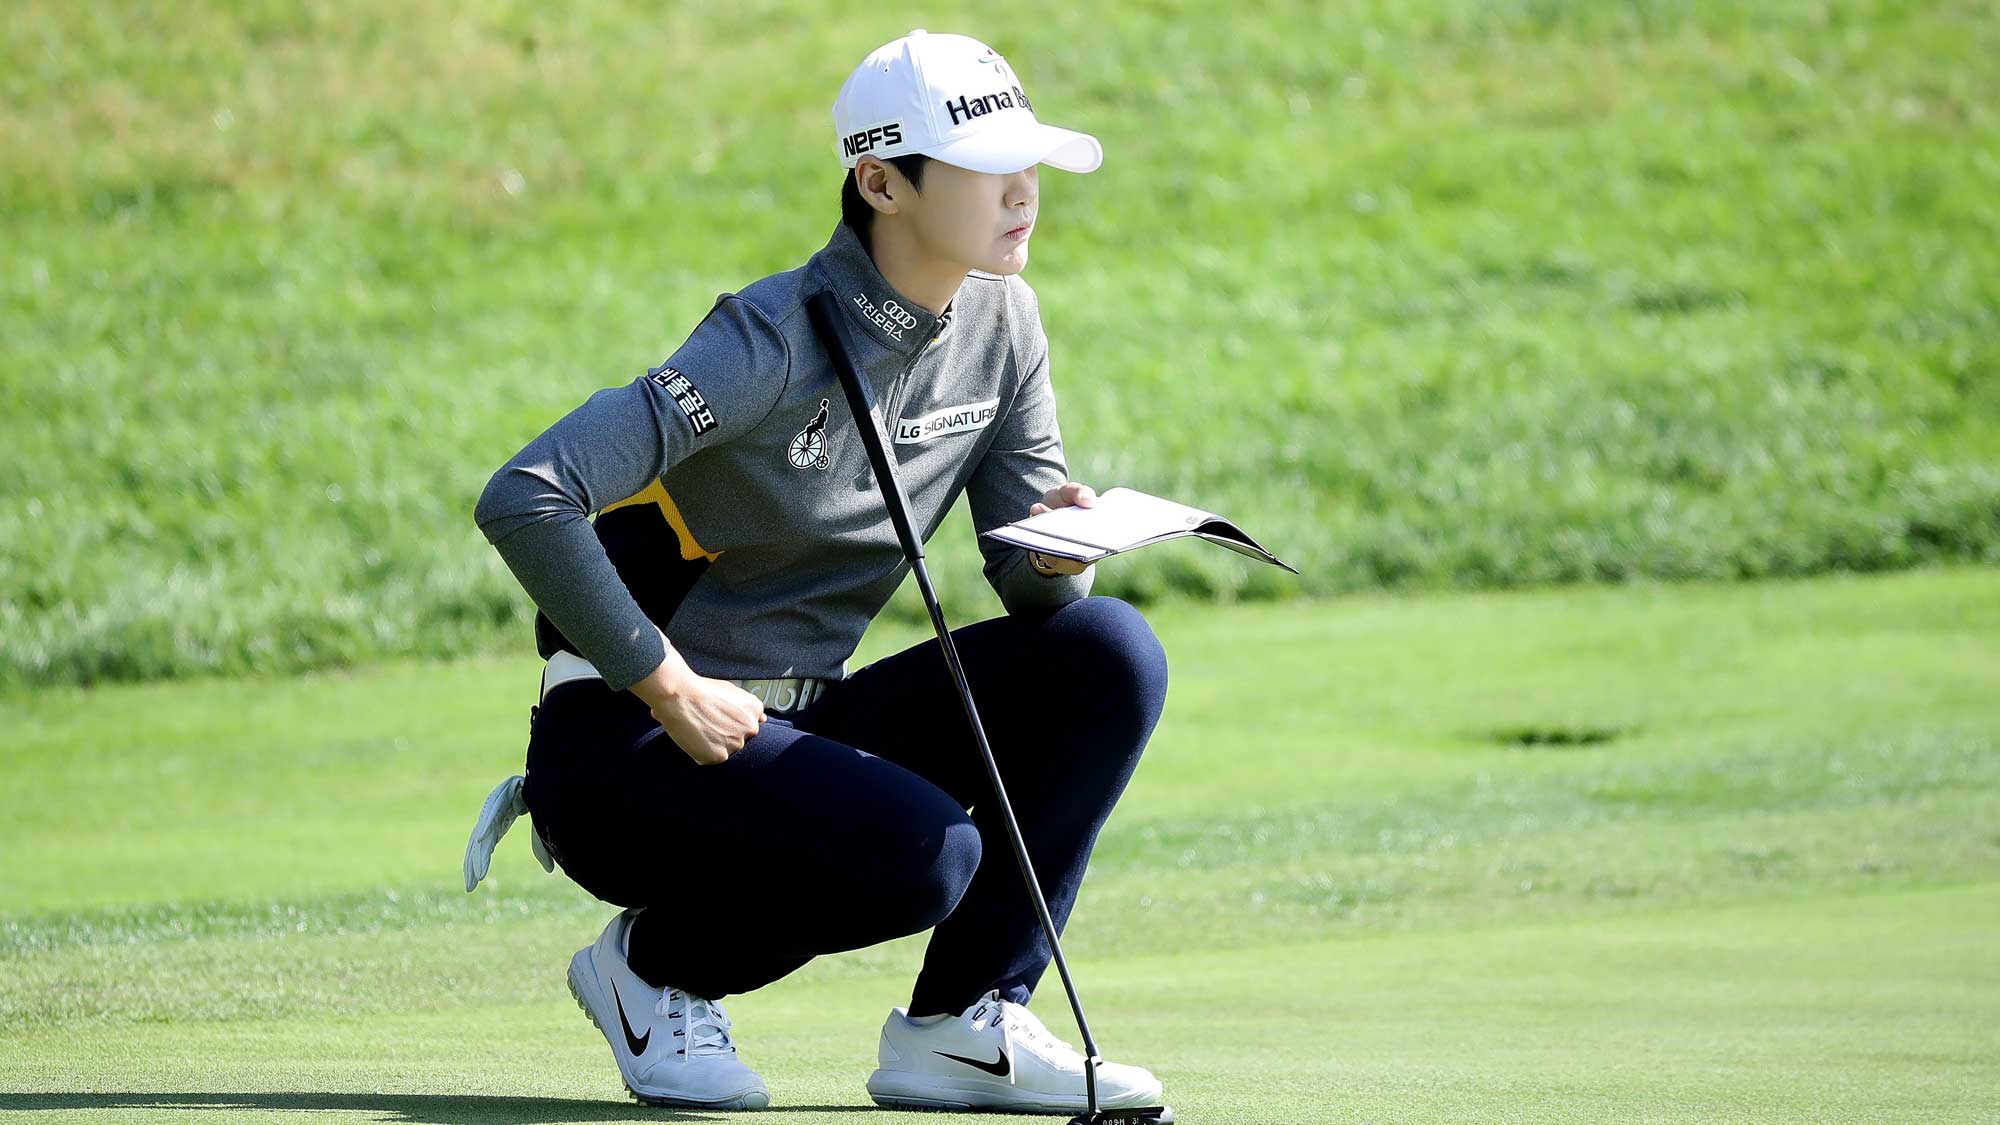 Sung-Hyun Park of South Korea on the 2nd hole during the second round of the LPGA KEB Hana Bank Championship 